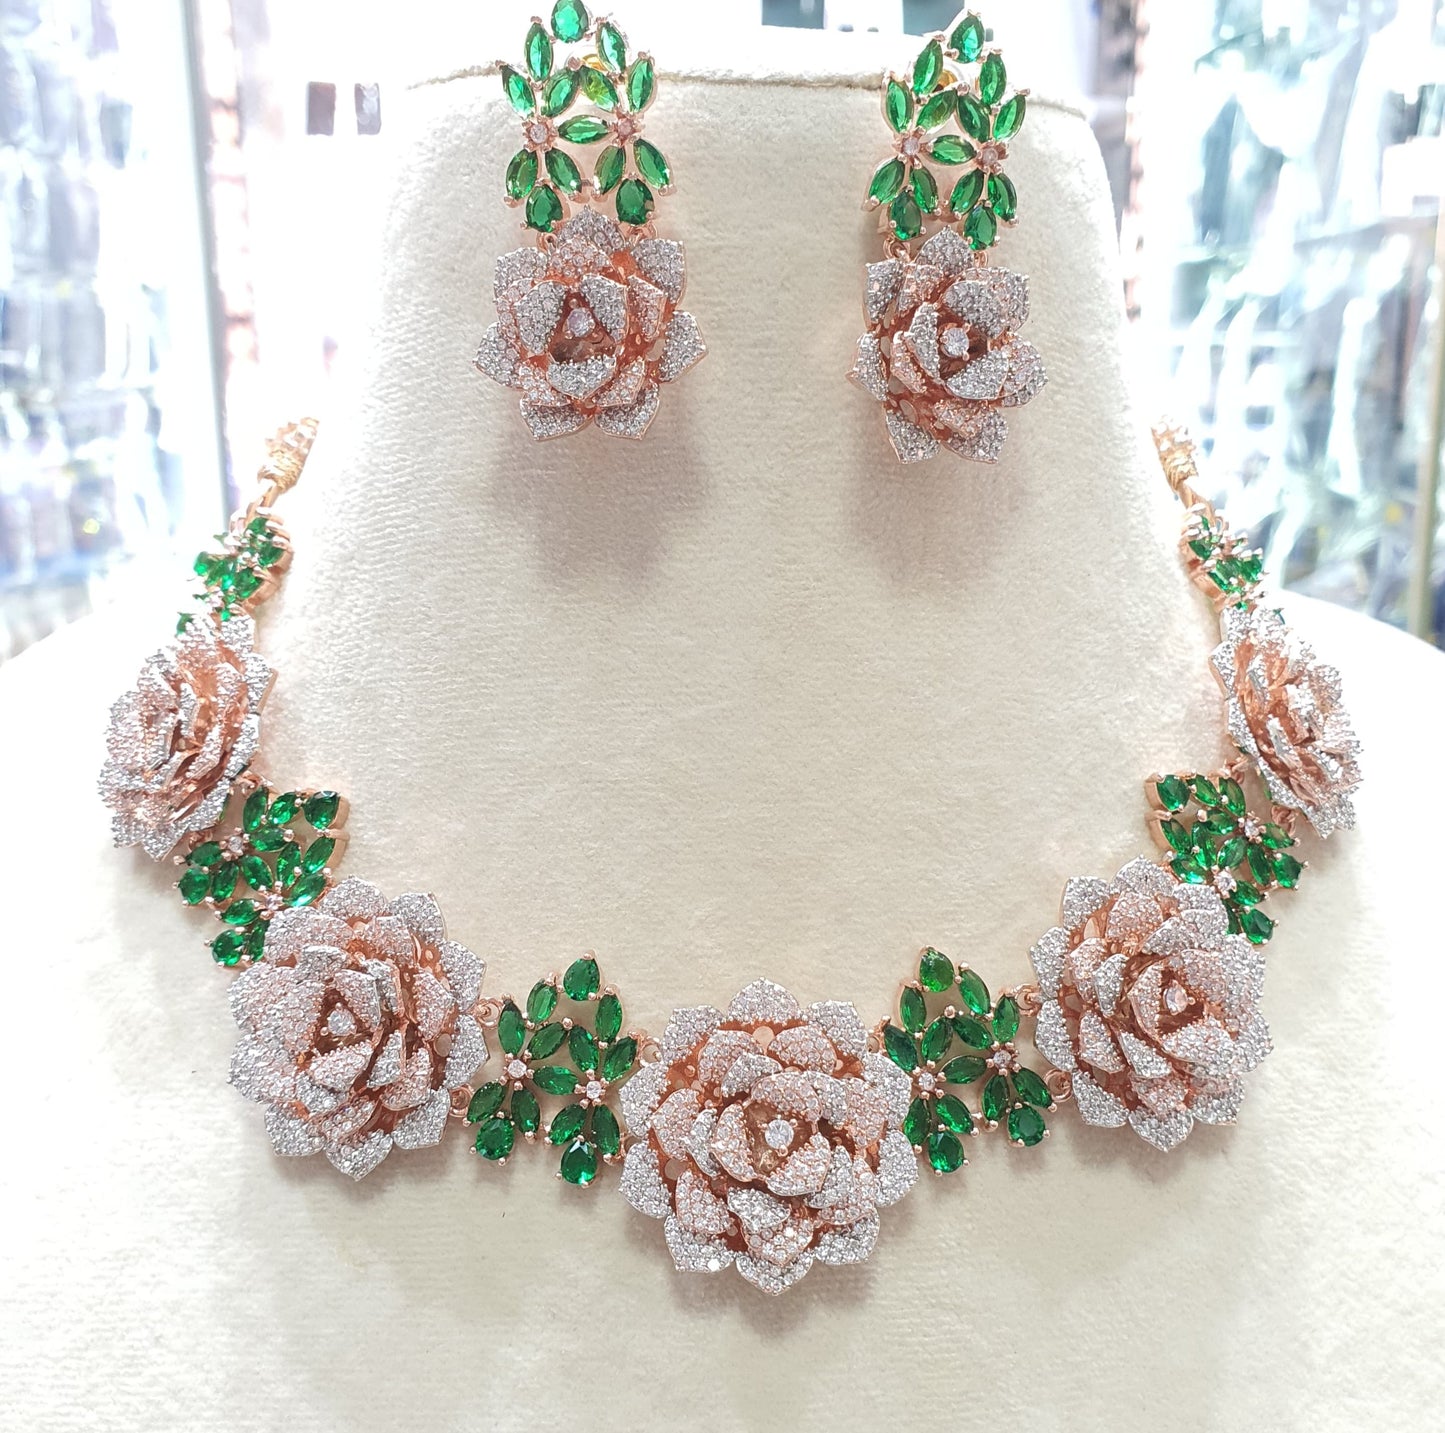 Amazing Flower Design American Diamond Stone Necklace Set with Earrings- RoseGold